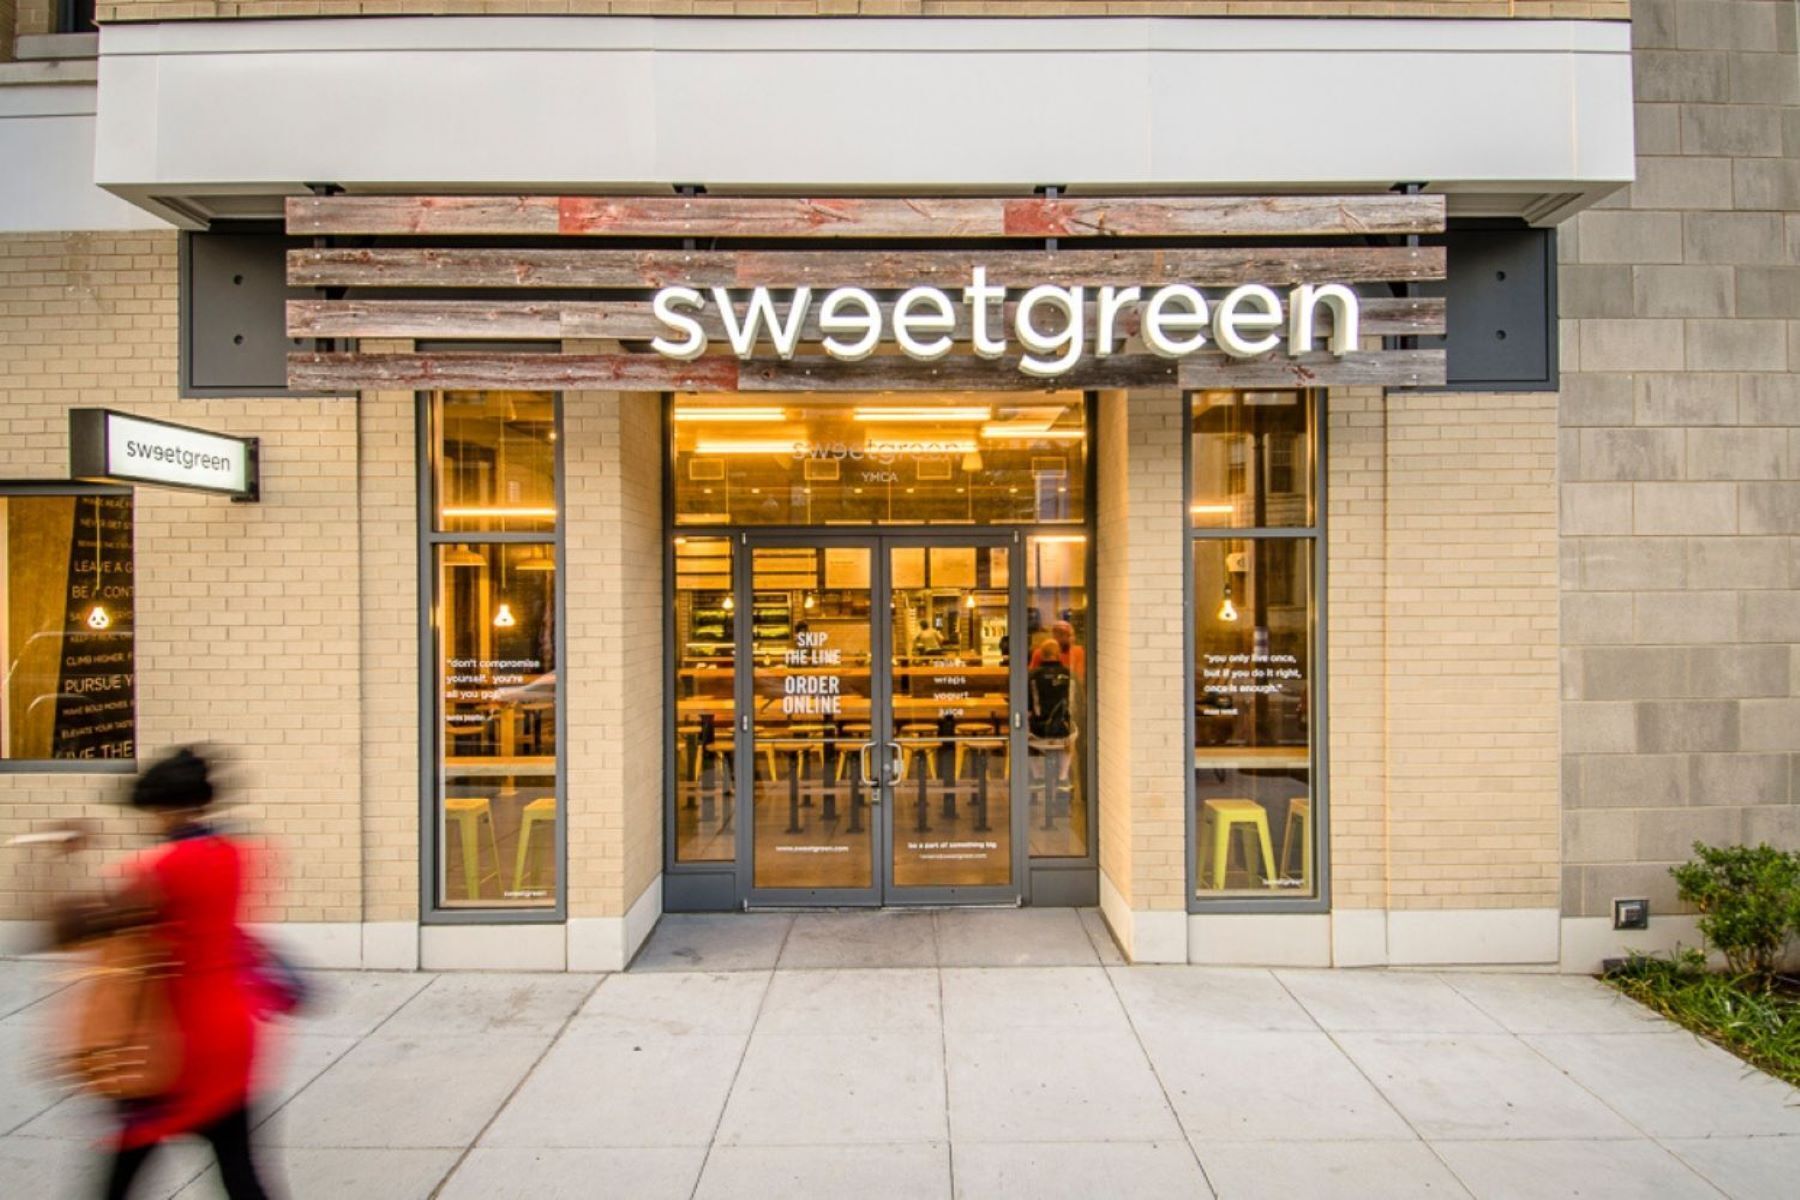 Sweetgreen has closed locations in Los Angeles, Boston and New York City that were affected by slow or nonexistent urban recoveries. (CoStar)